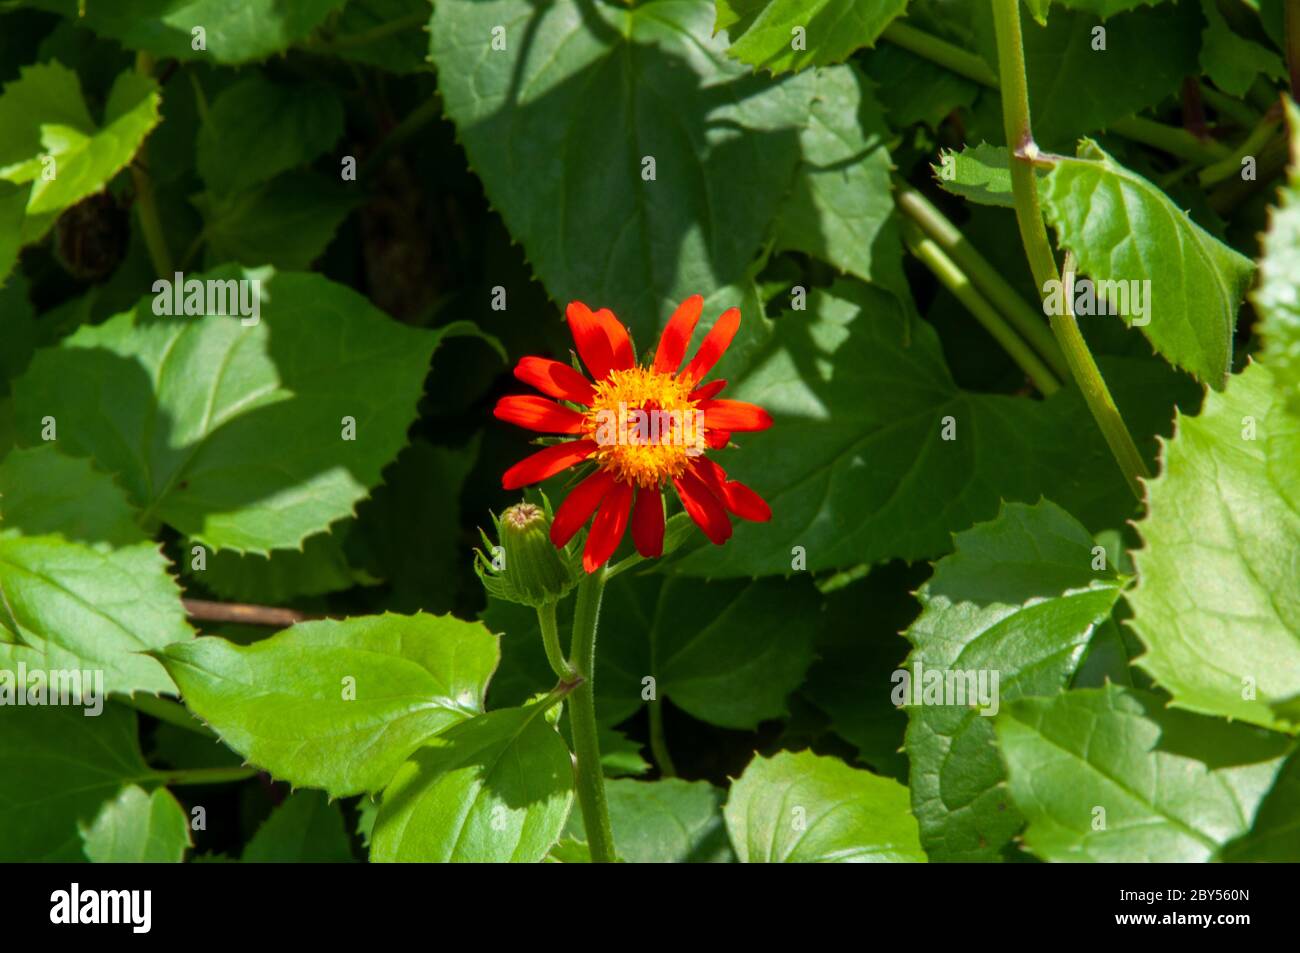 Beautiful orange and red tropical single flower Subfamily Asteroideae a member of Sunflowers, Daisies, Asters, and Allies Family Asteraceae Stock Photo